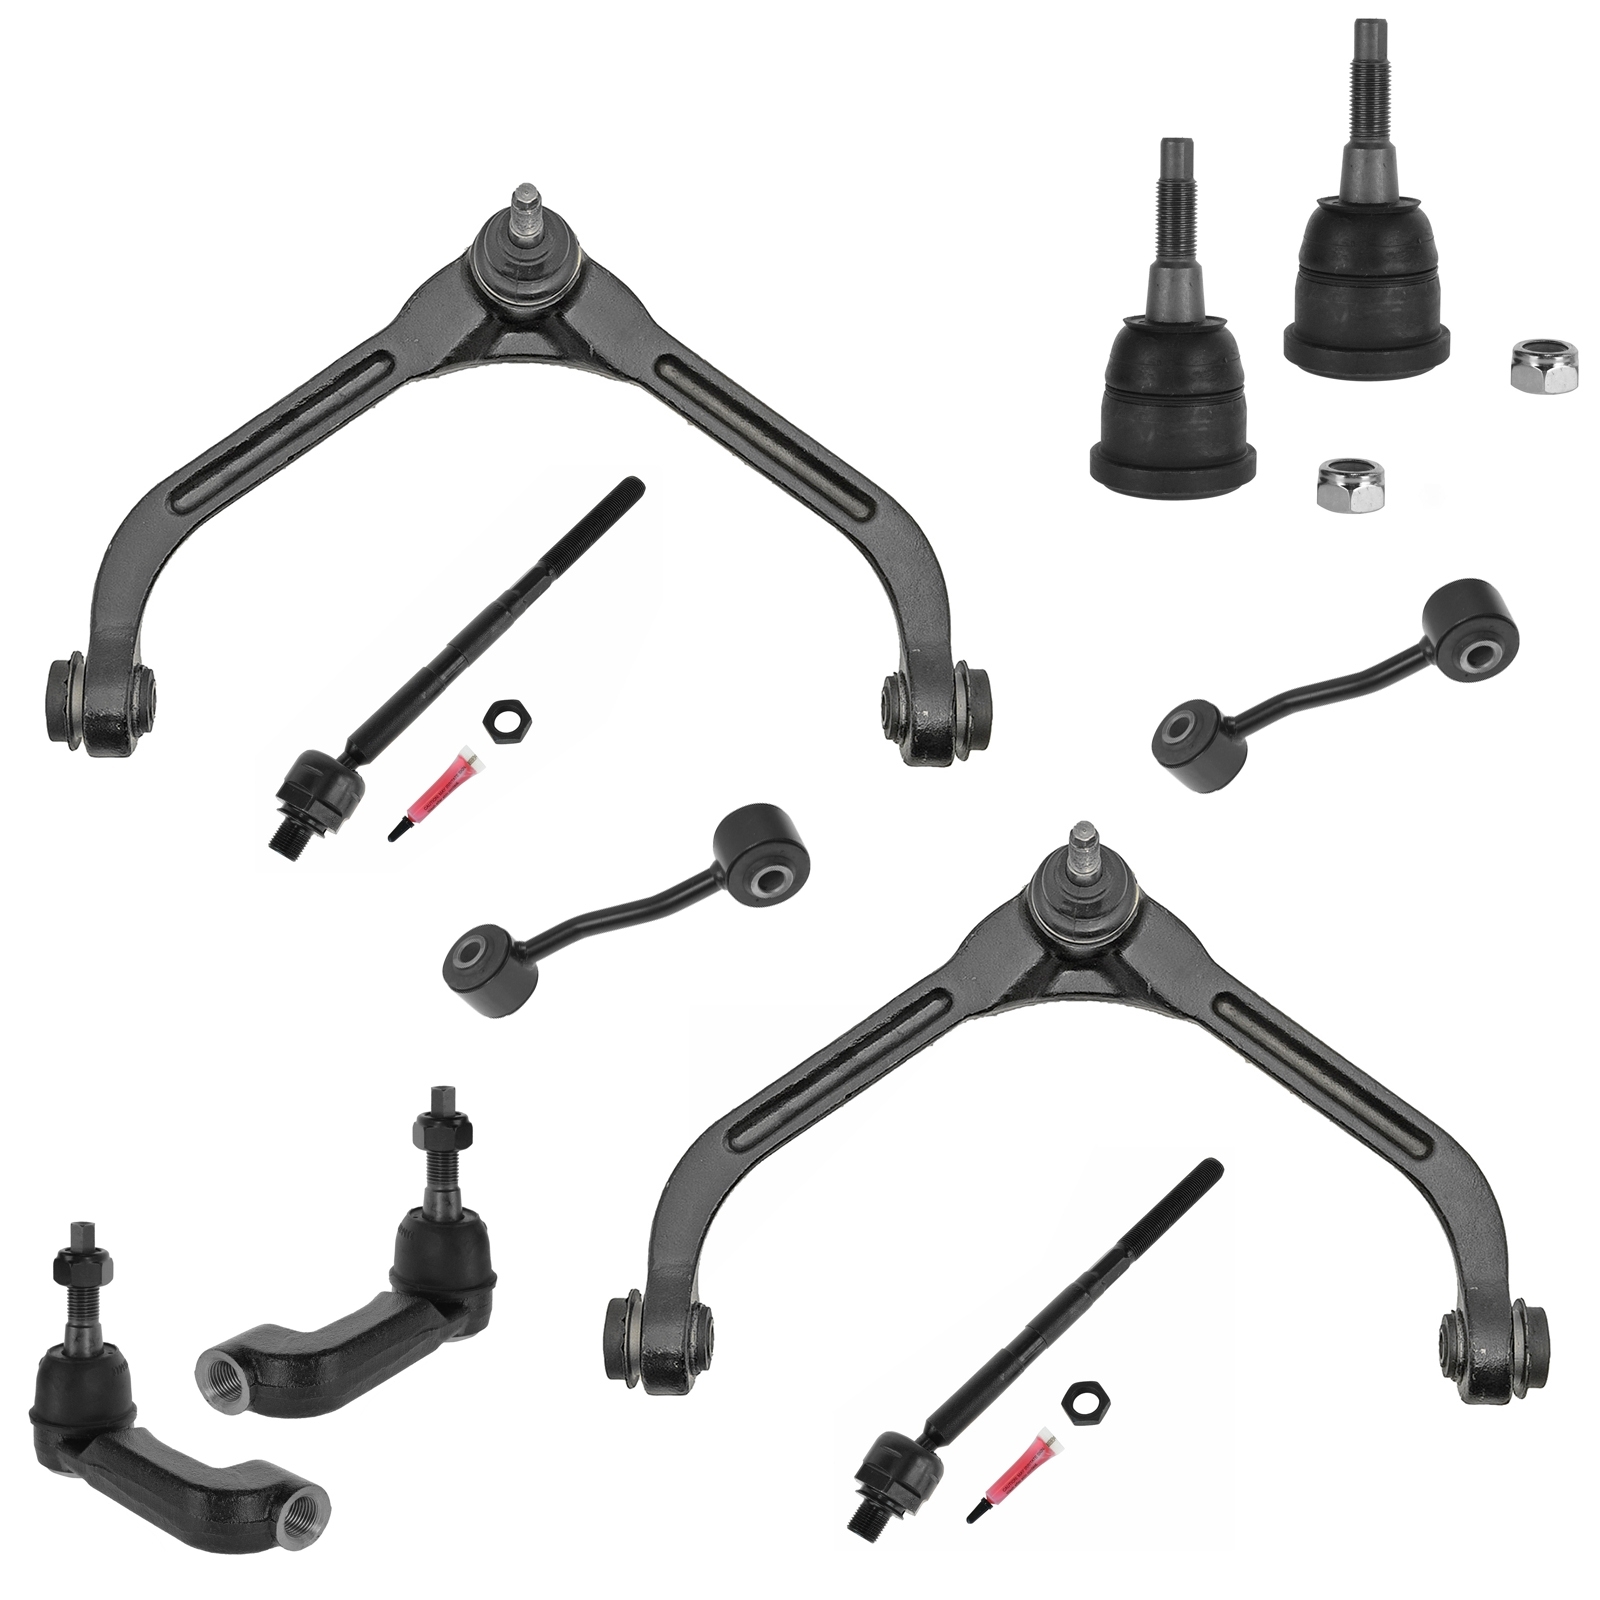 Trq 10 Piece Steering & Suspension Service Kit With Upper Control Arms For 06-07 Liberty,